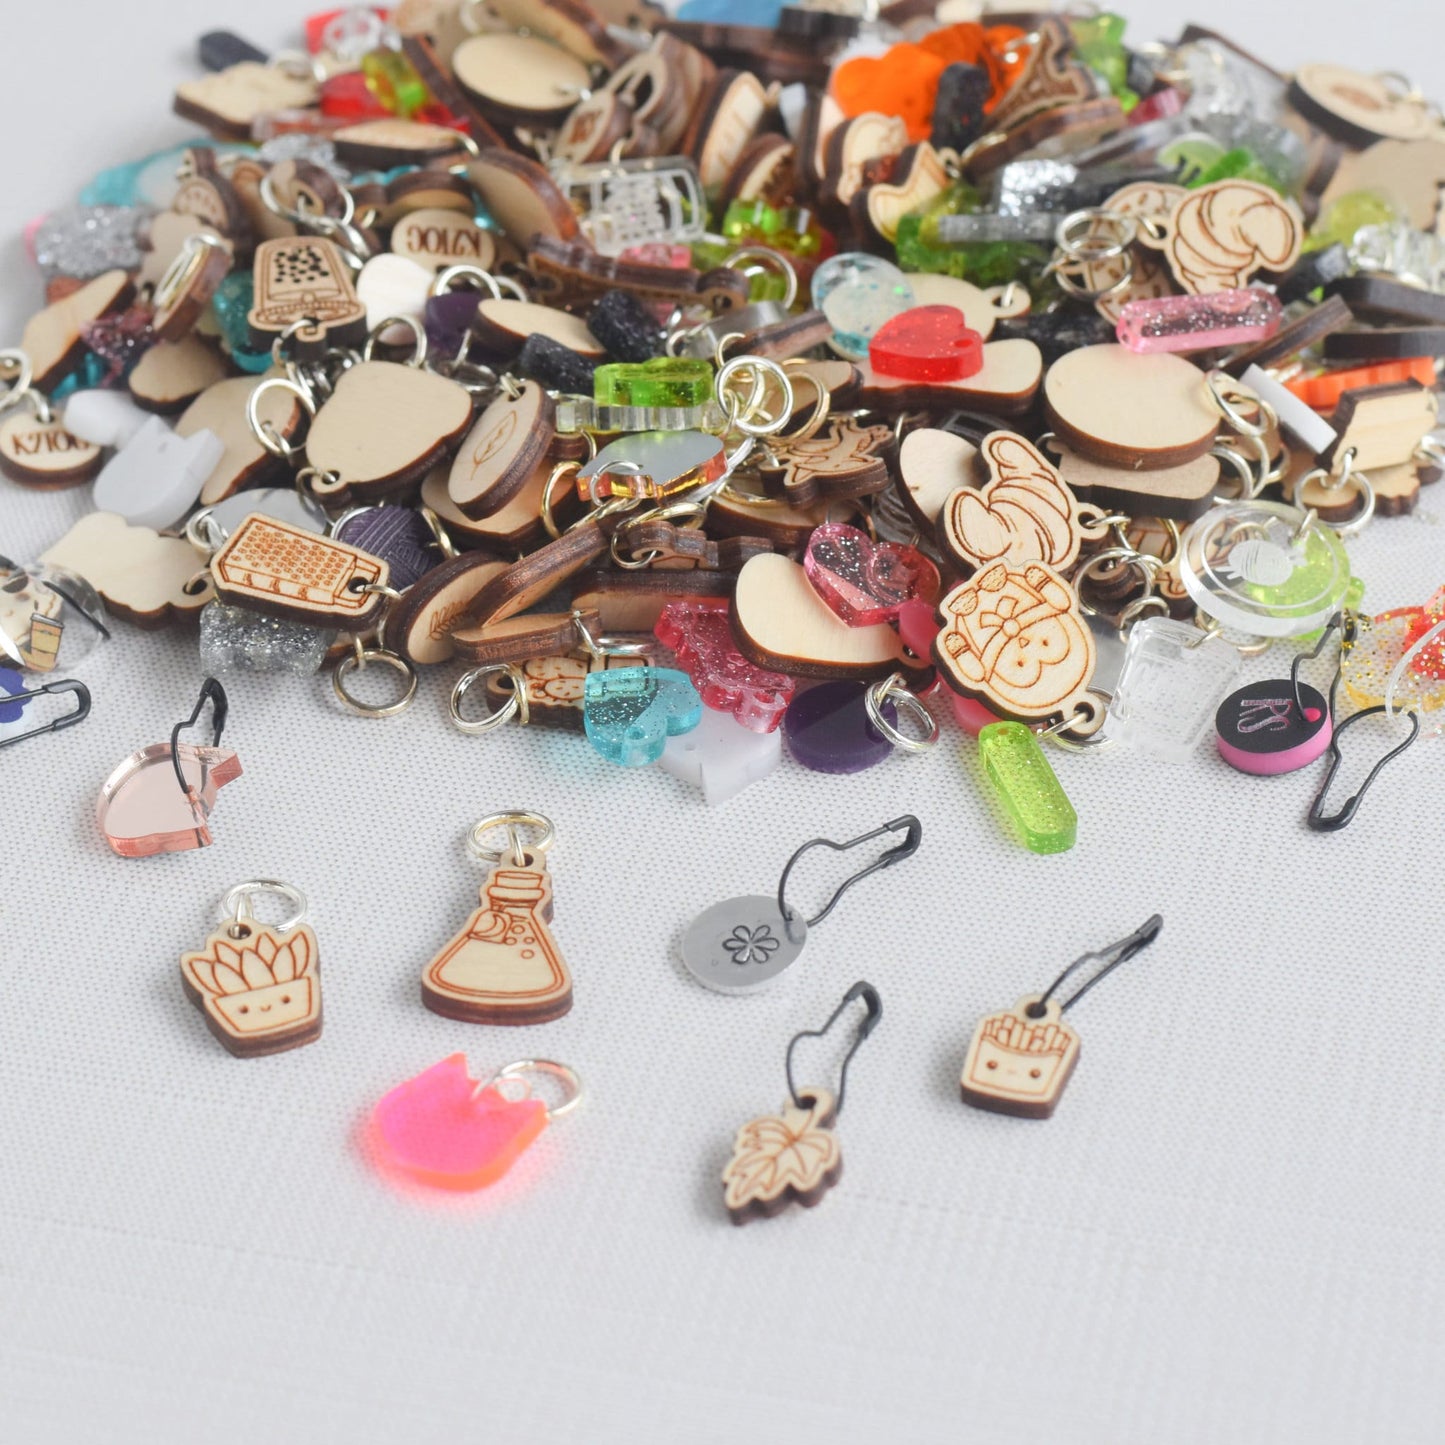 Stitch Marker Mystery Grab Bag - Set of 6 Assorted Stitch Markers, Acrylic Wood Stitch Markers, Small Stitch Markers, Mystery Package